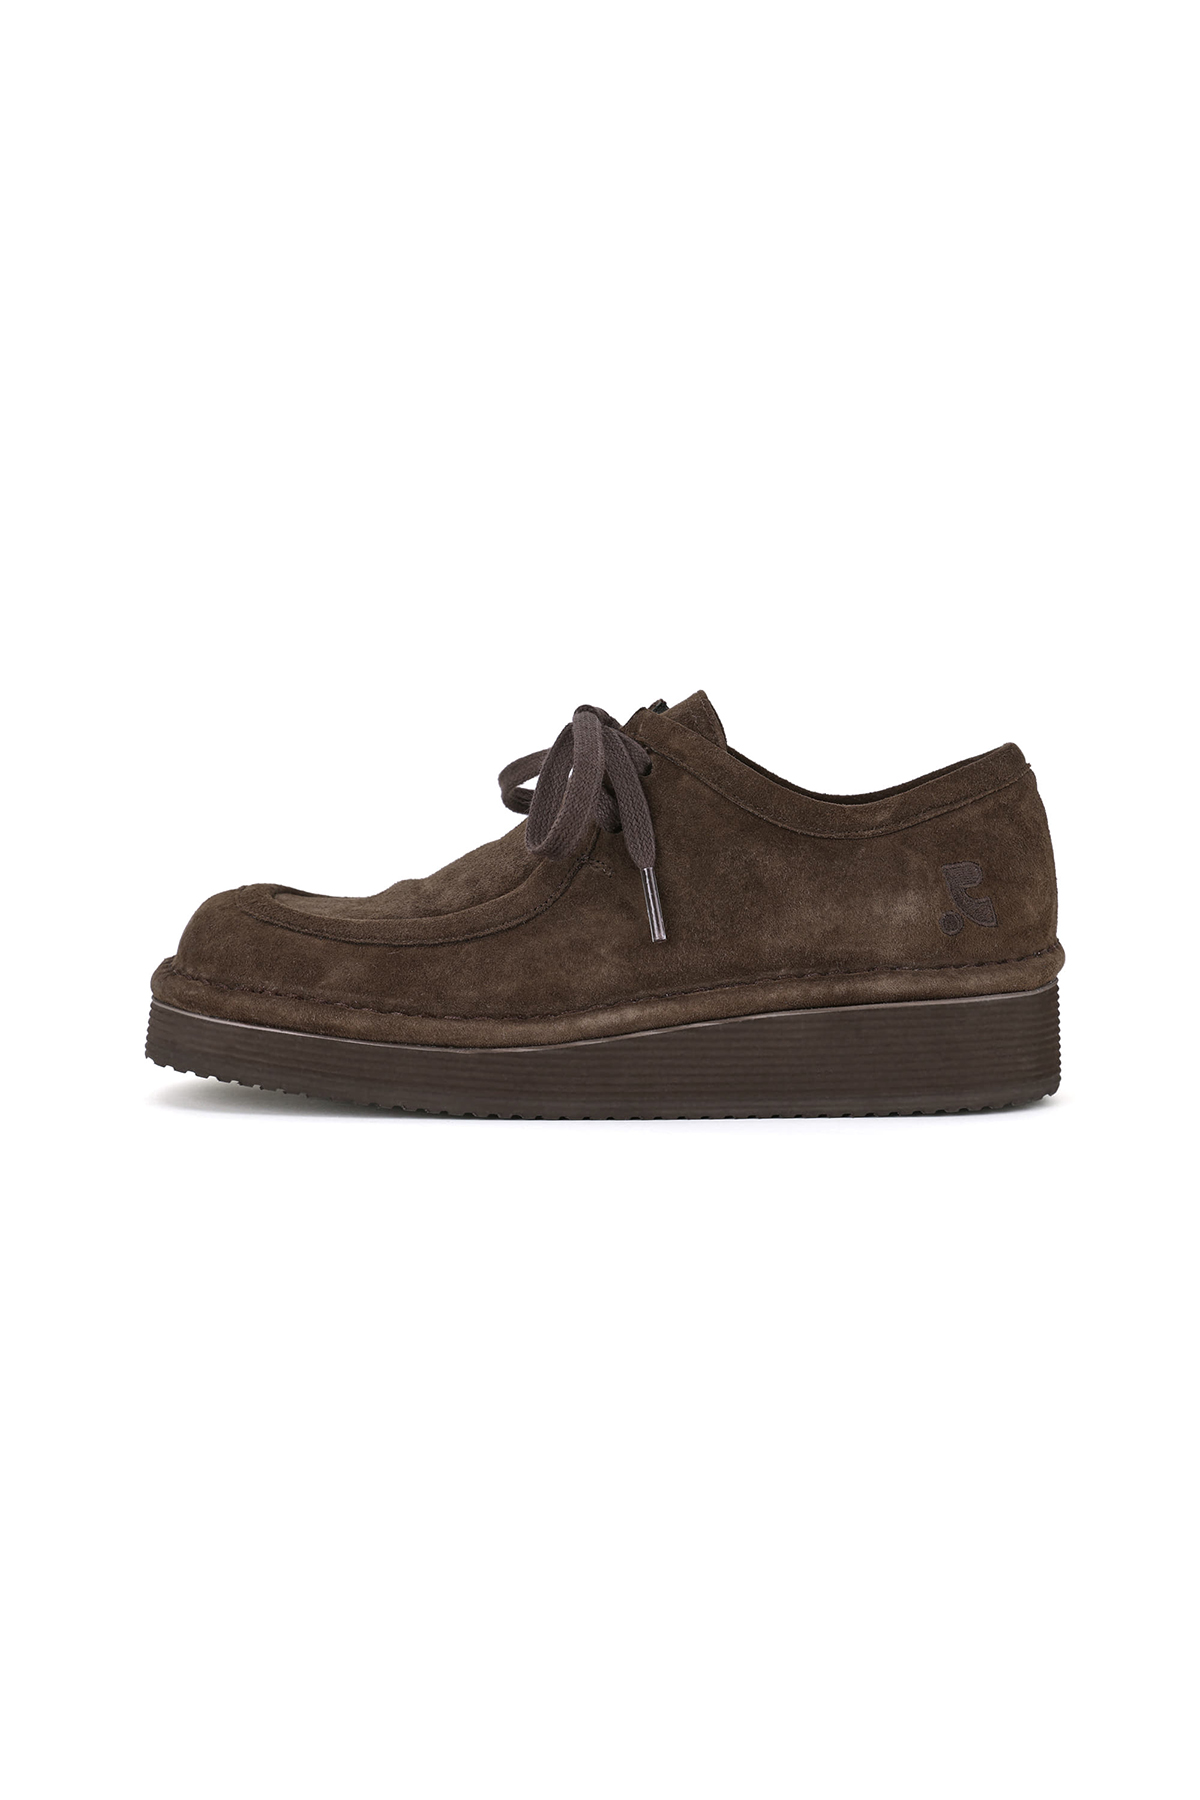 CHUKKA DERBY (RR with KHIHO) - BROWN